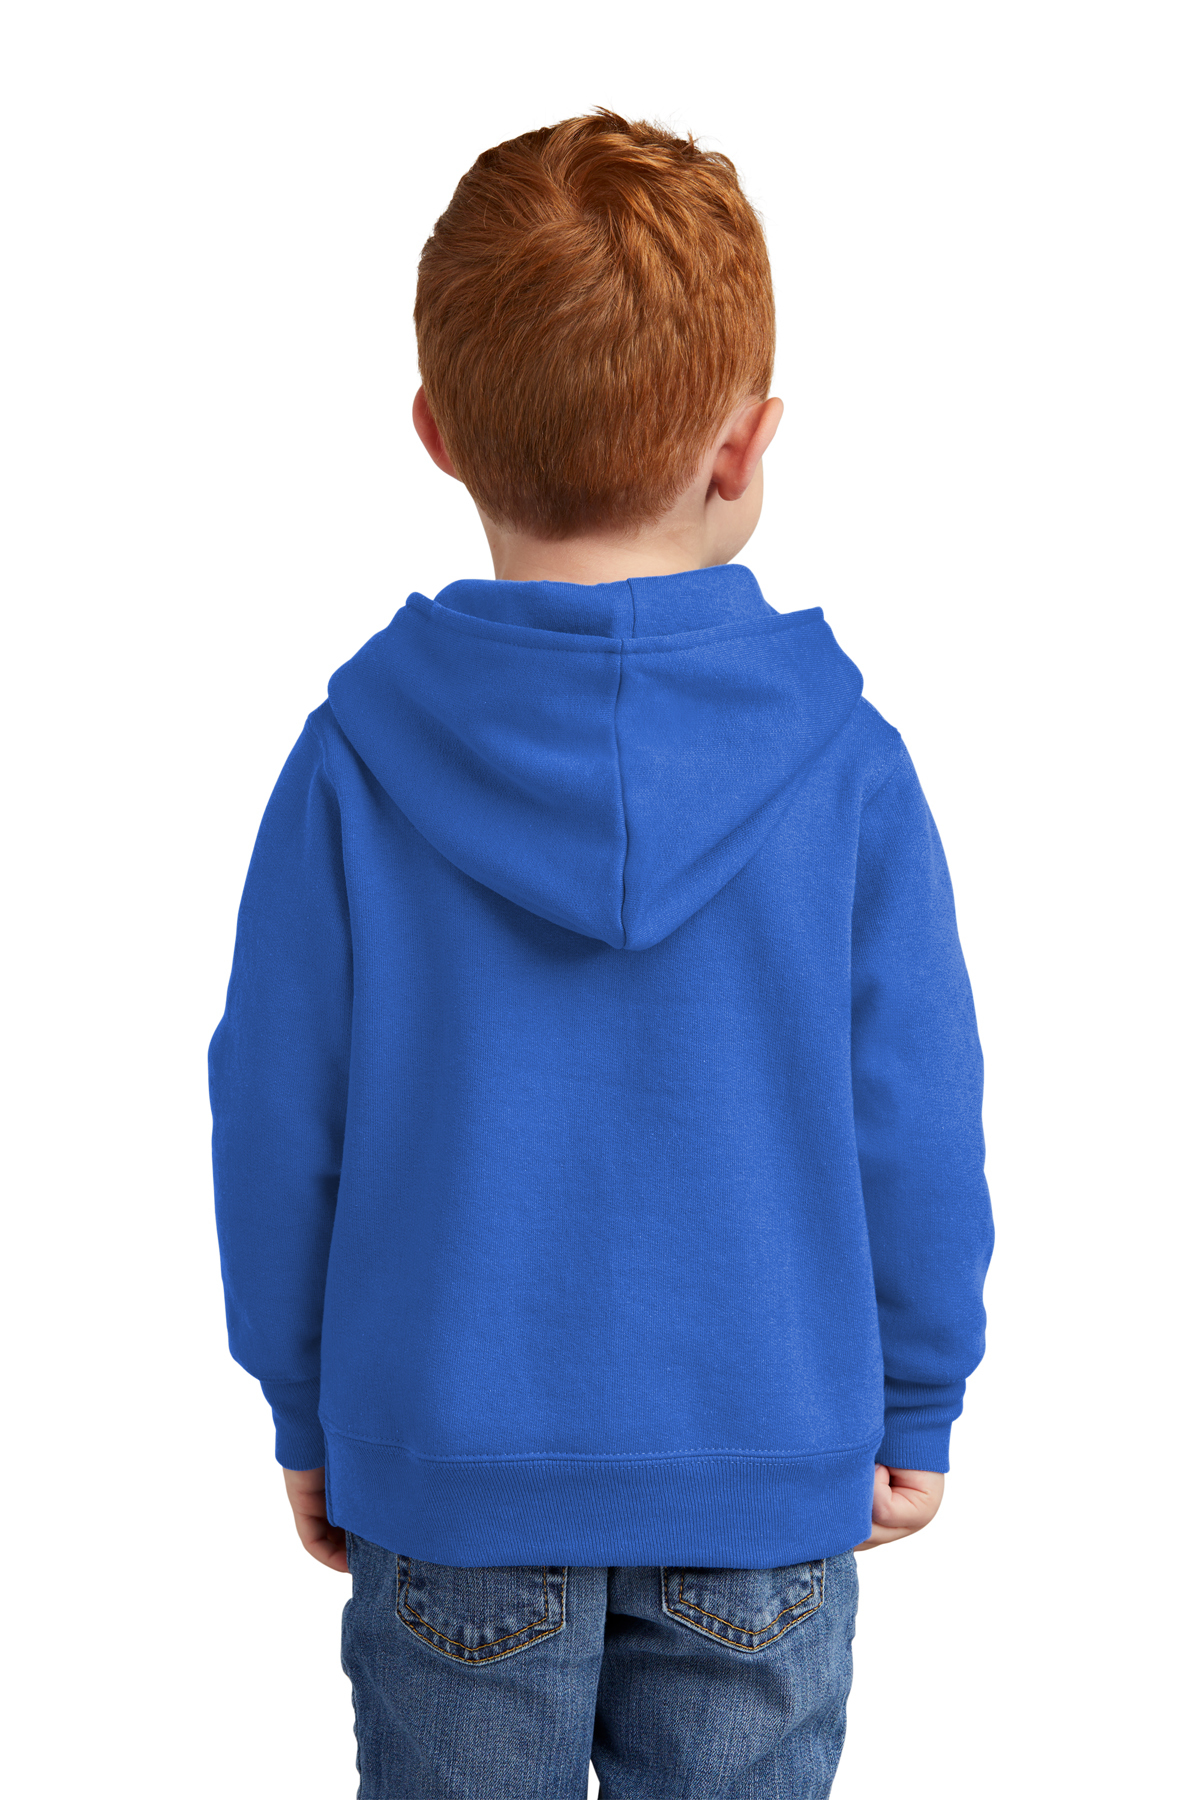 Port & Company Toddler Core Port Hooded & Company | | Product Pullover Fleece Sweatshirt